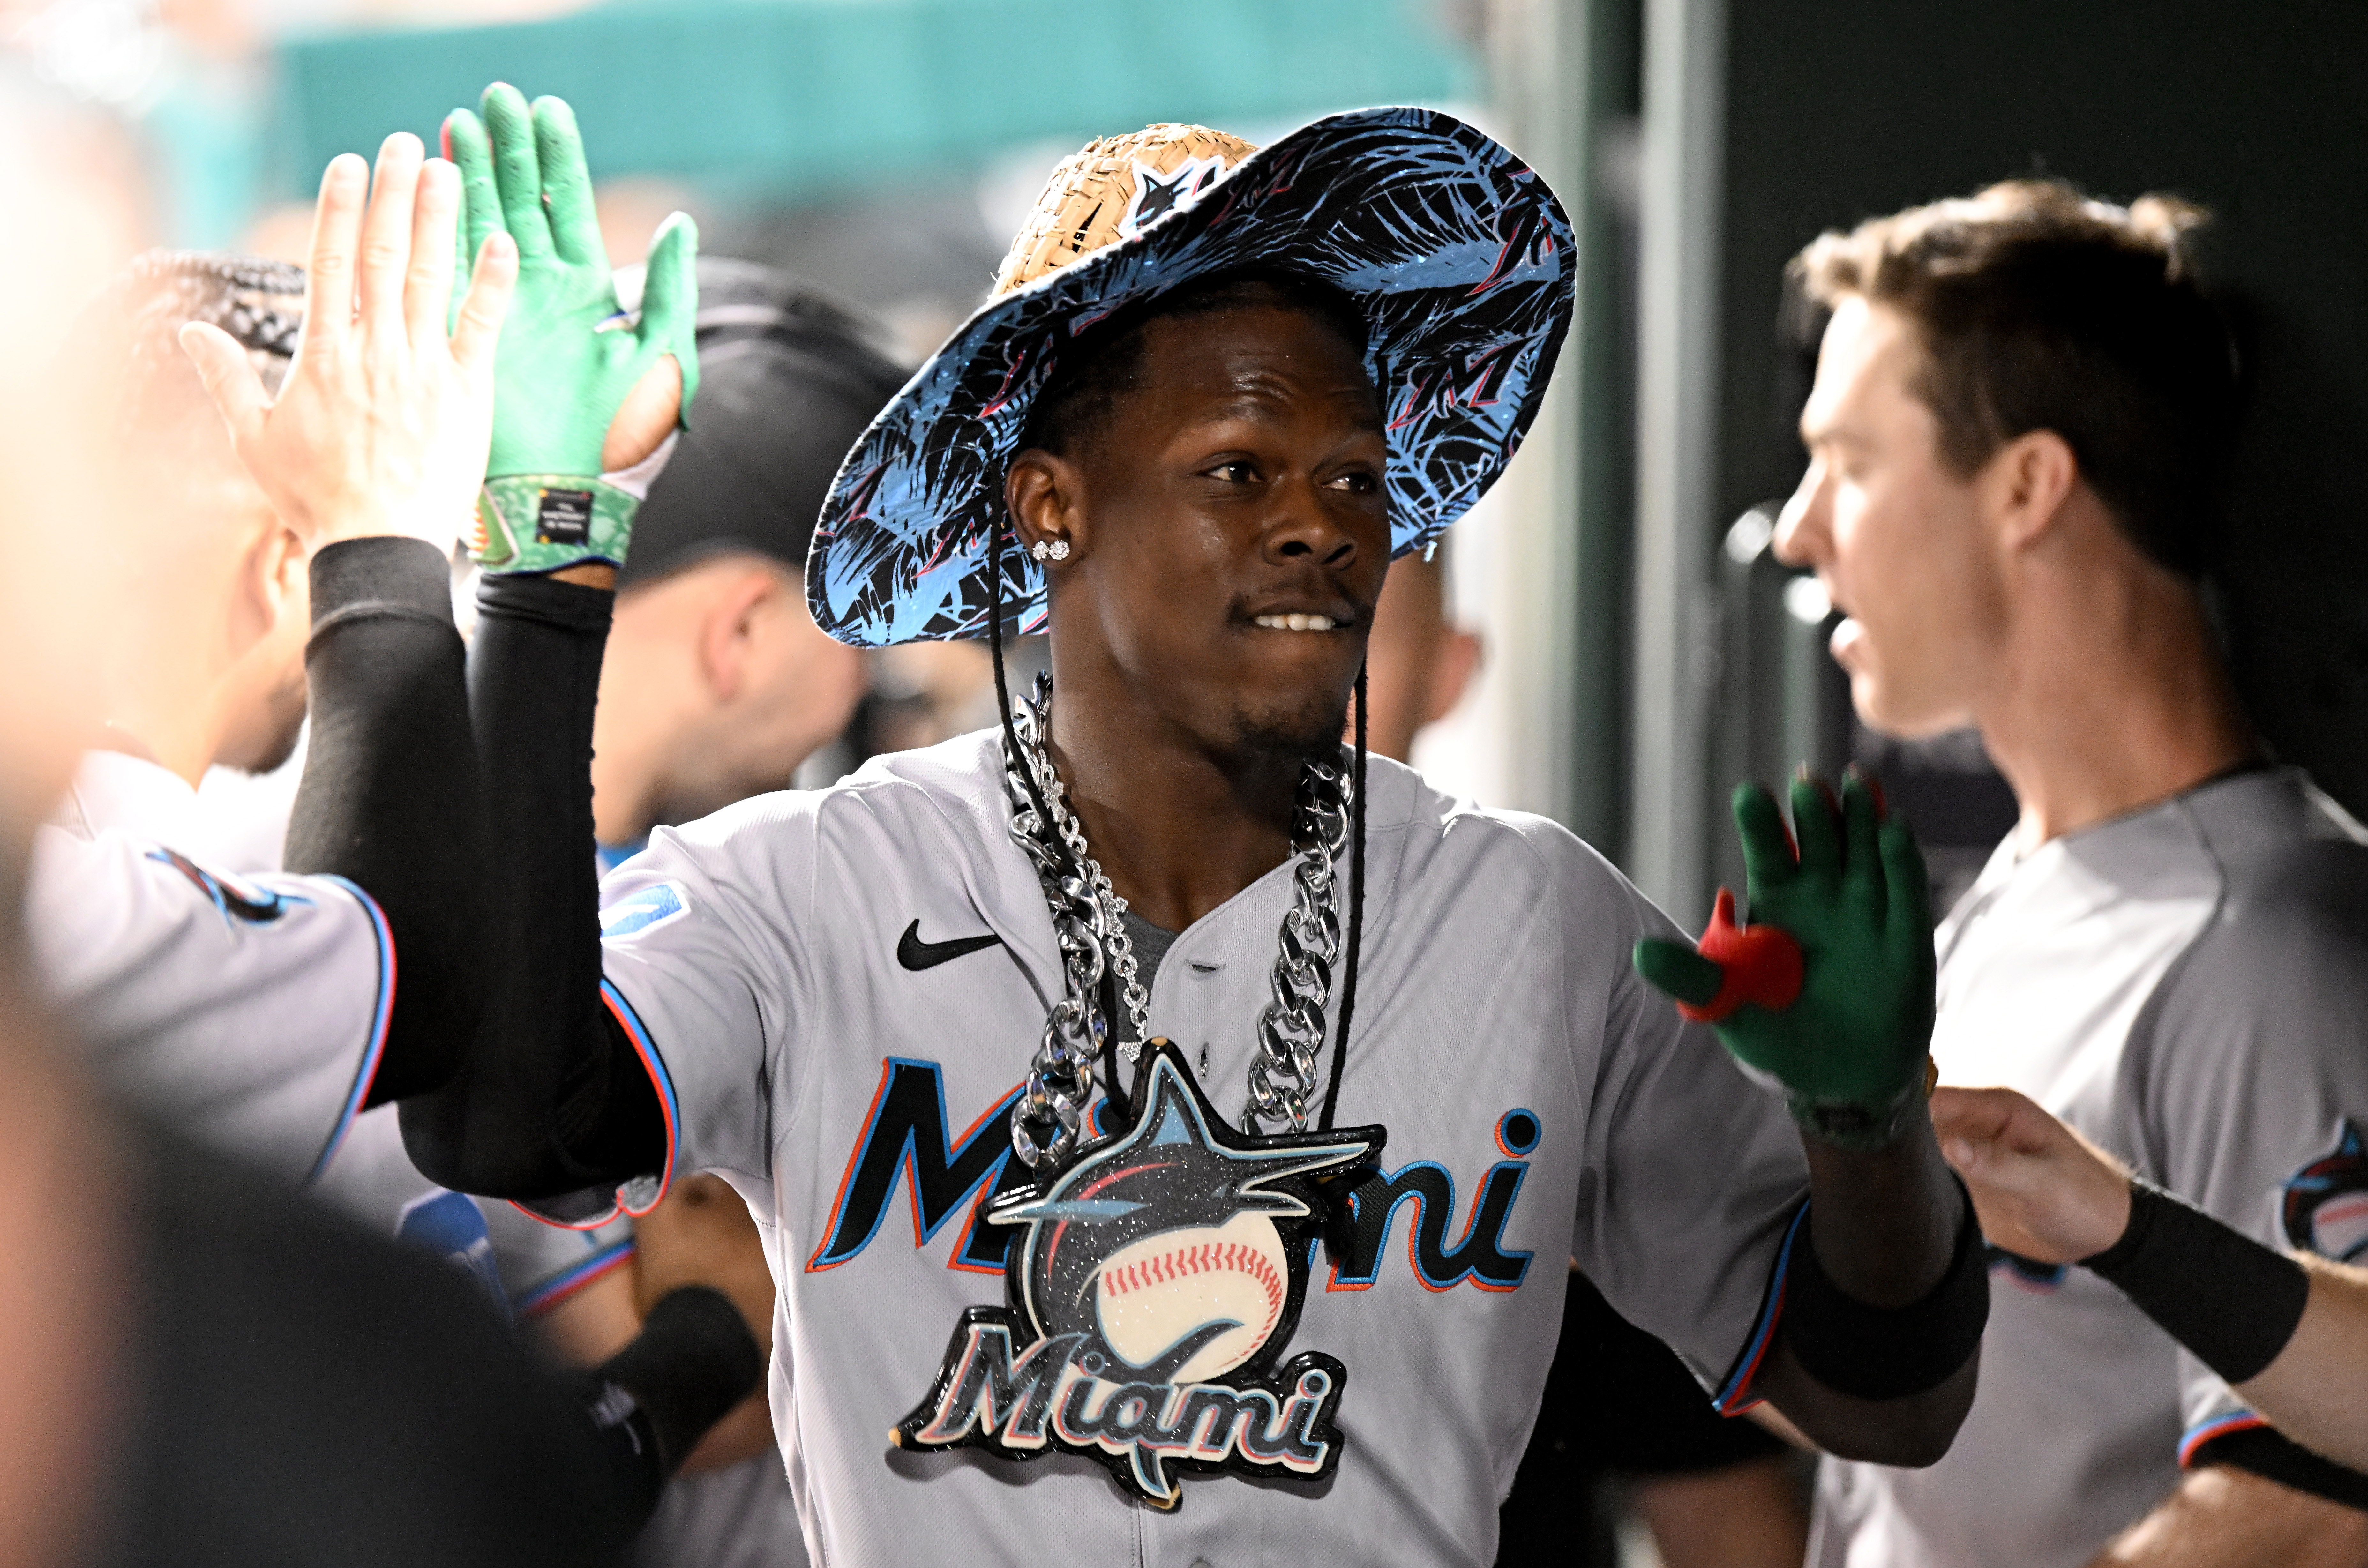 Chisholm's 3-run homer helps Marlins defeat Nationals 6-1 to get back to  .500